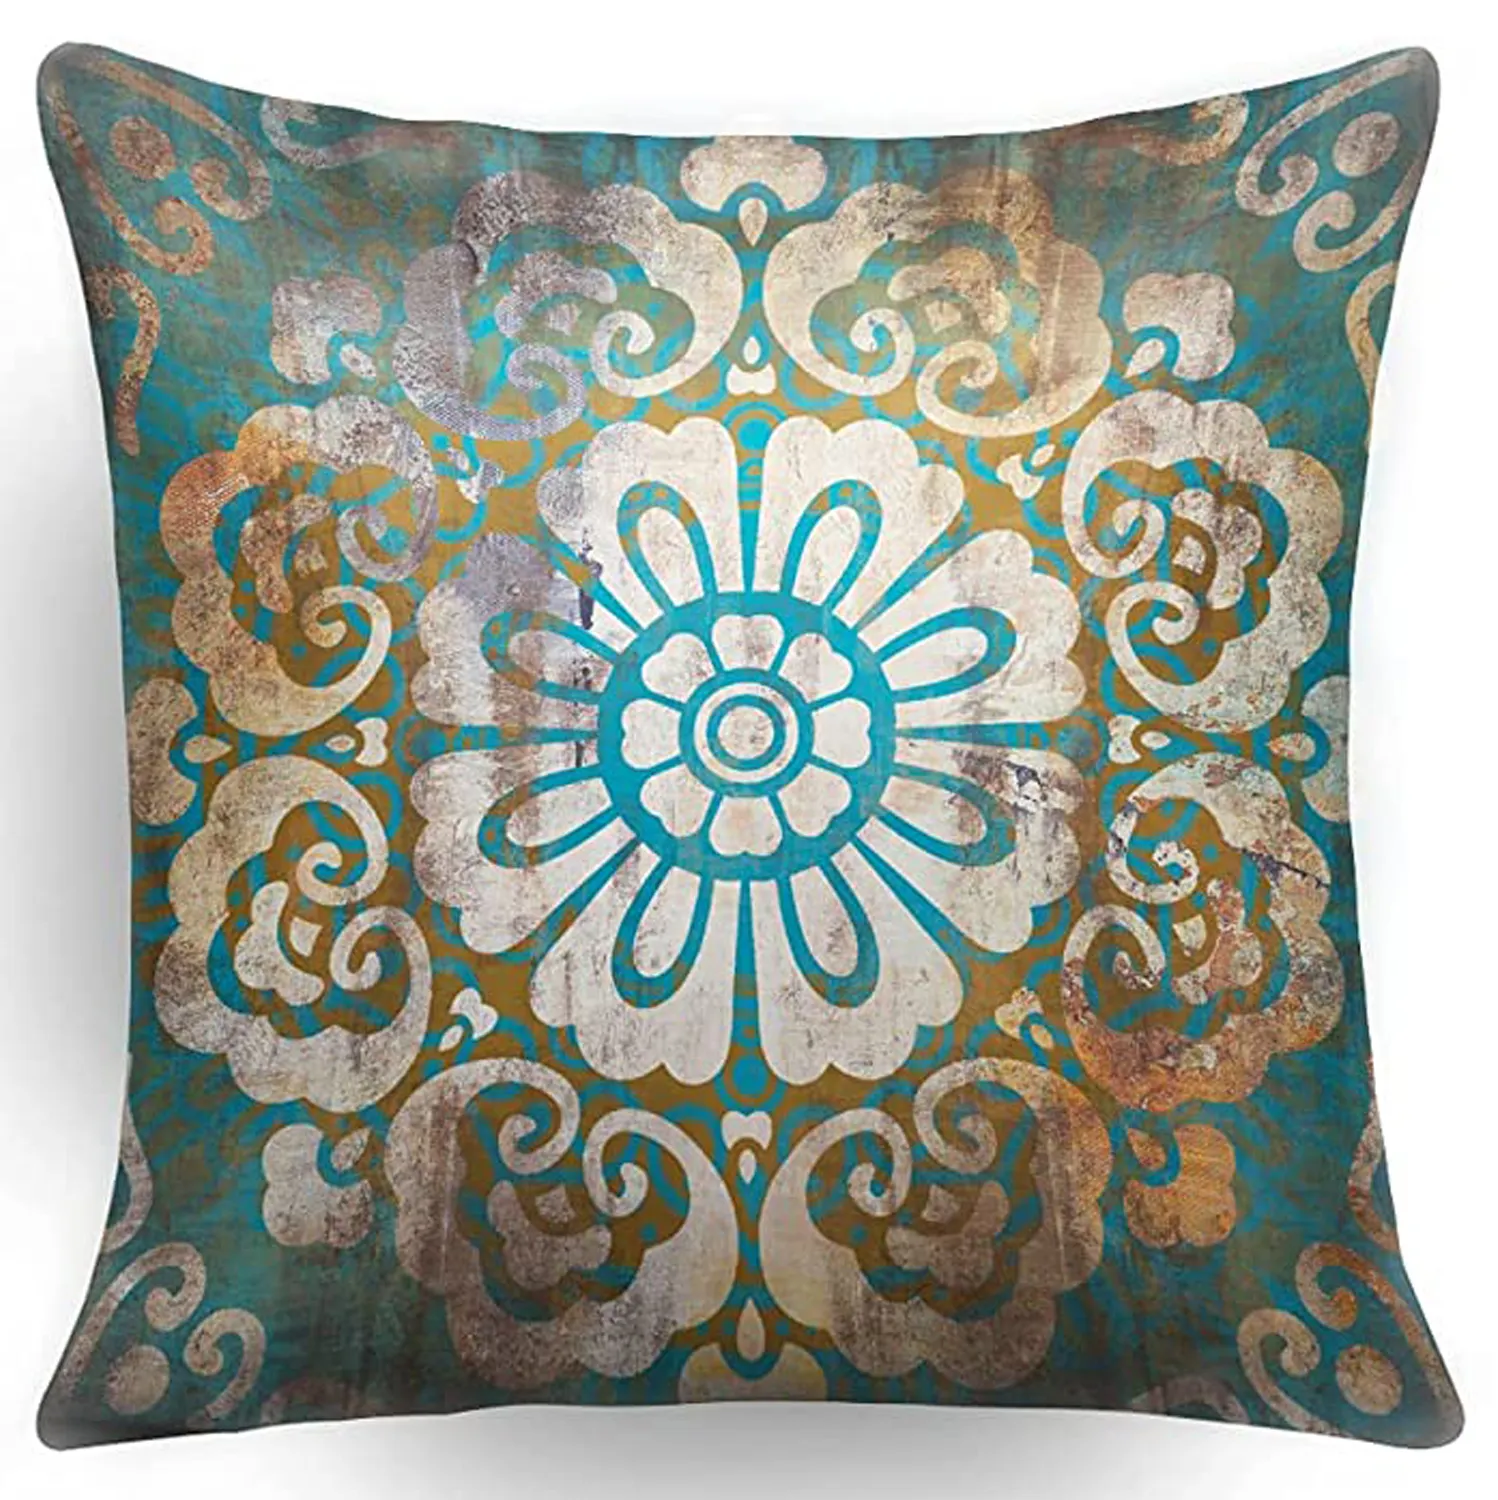 Set of 4 Throw Pillow Covers Home Decorative Bohemia pillow Cases Soft Velvet Cushion Covers 45x45cm(18 x 18 inch)